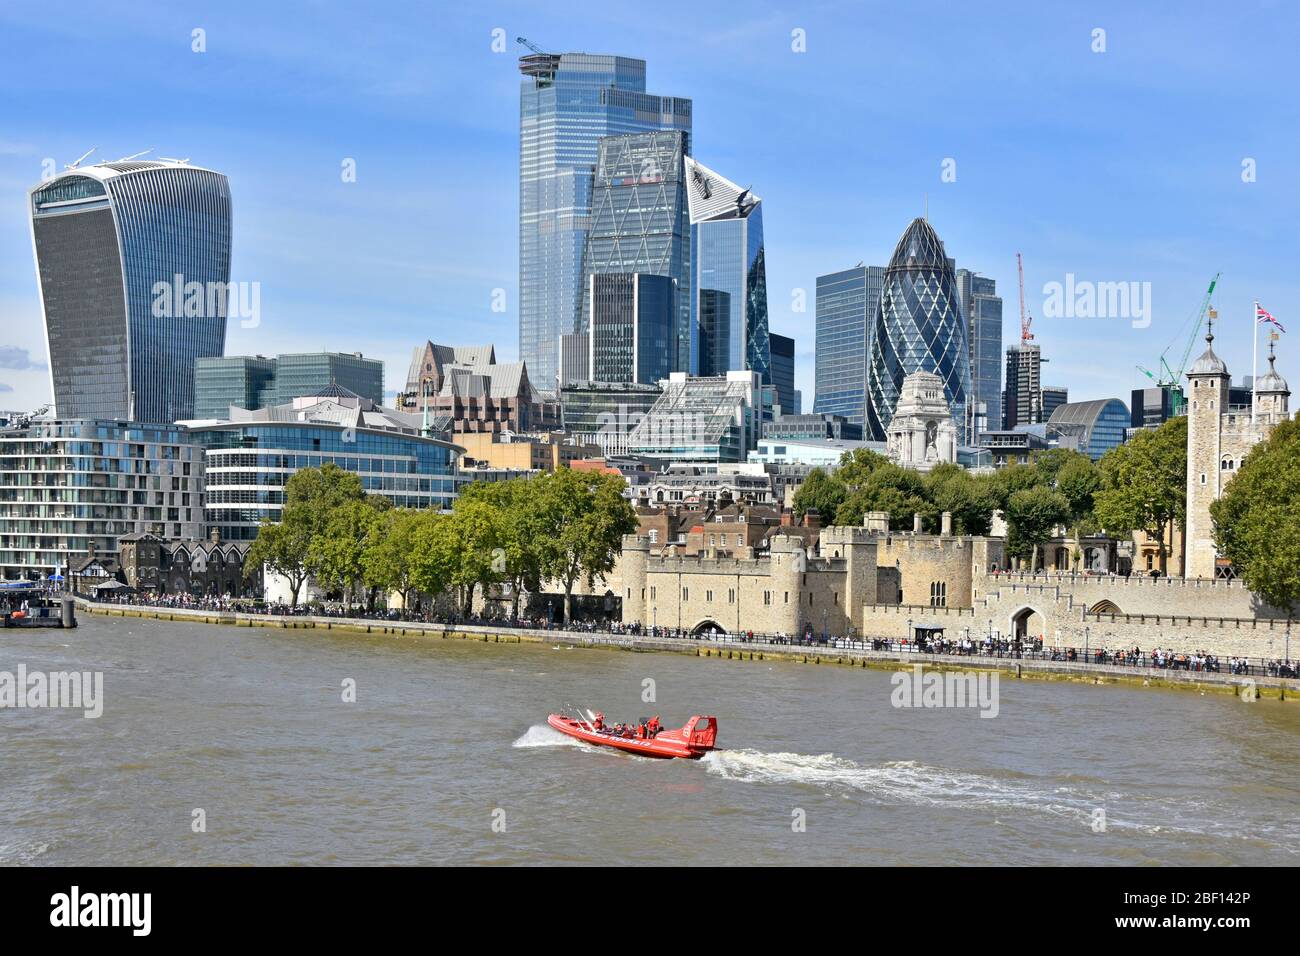 Thames Rockets speedboat business operate fast RIB sightseeing tours on River Thames passing historic Tower of London & modern city skyline England UK Stock Photo